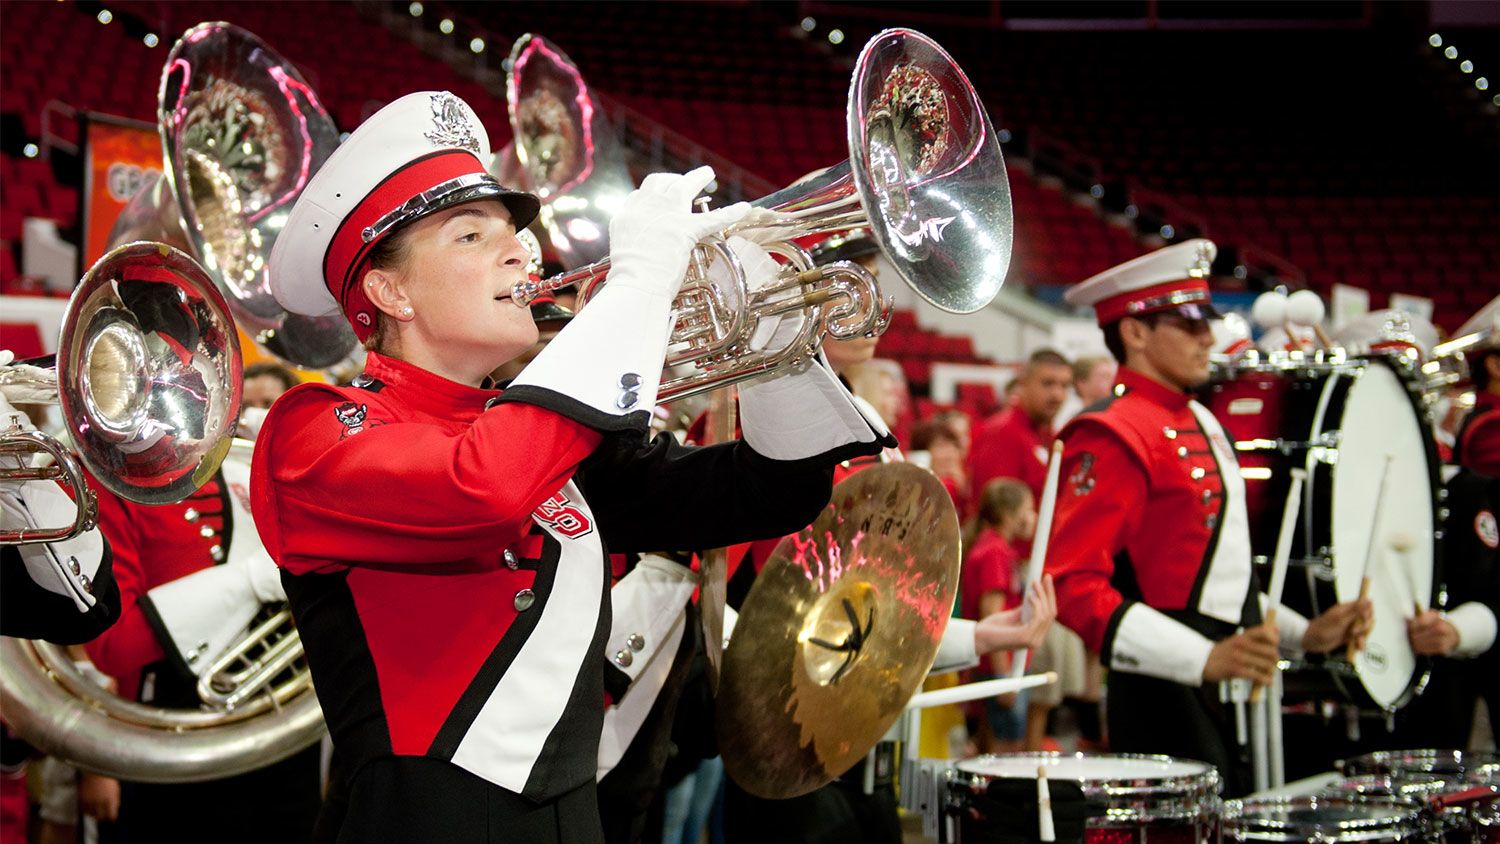 The NC State pep band plays at CALS Tailgate inside PNC Arena